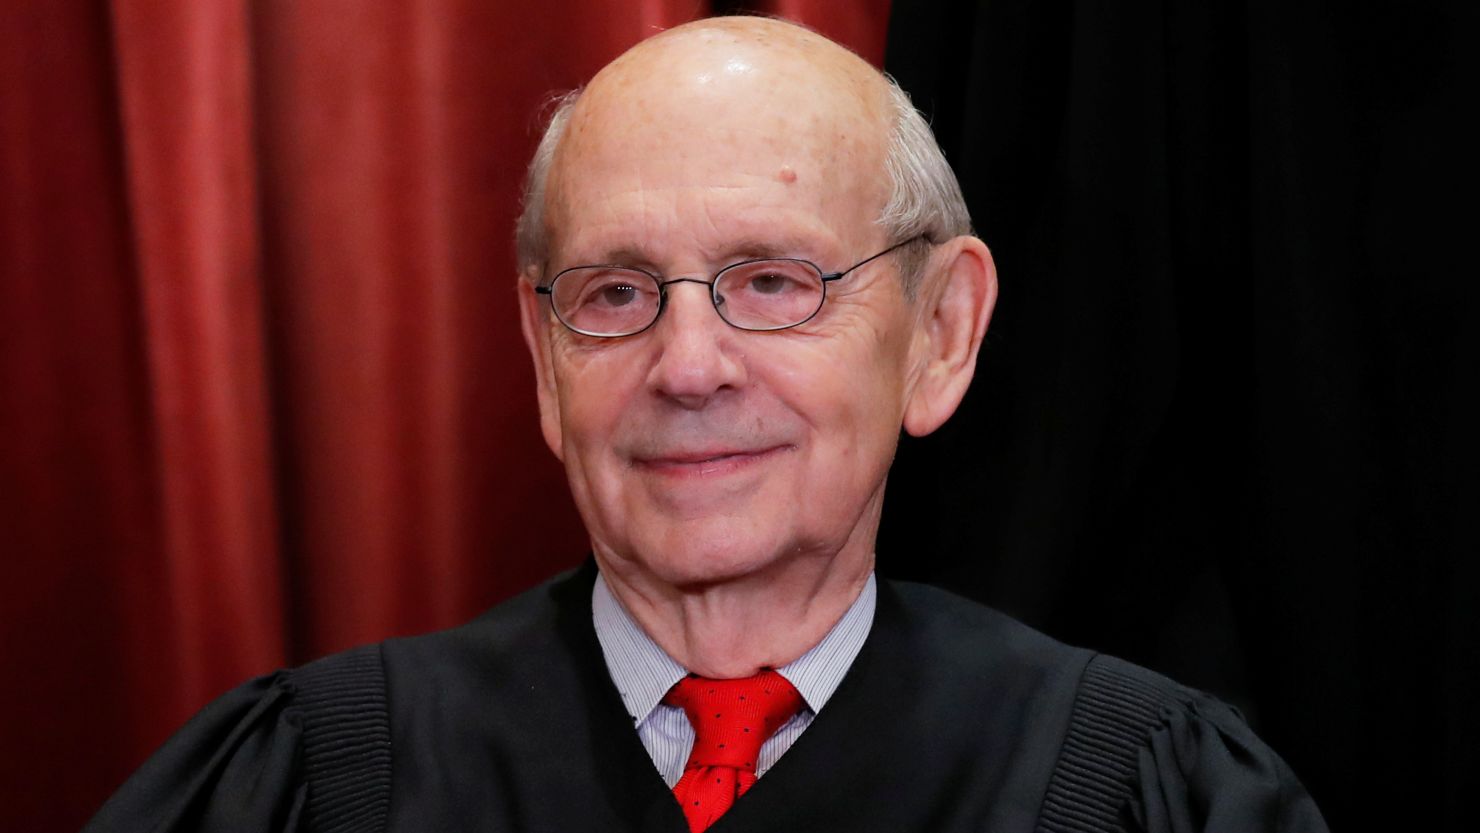 Retiring Chief Judge Says He Leaves Behind 'Modern' System That 'Delivers  Justice